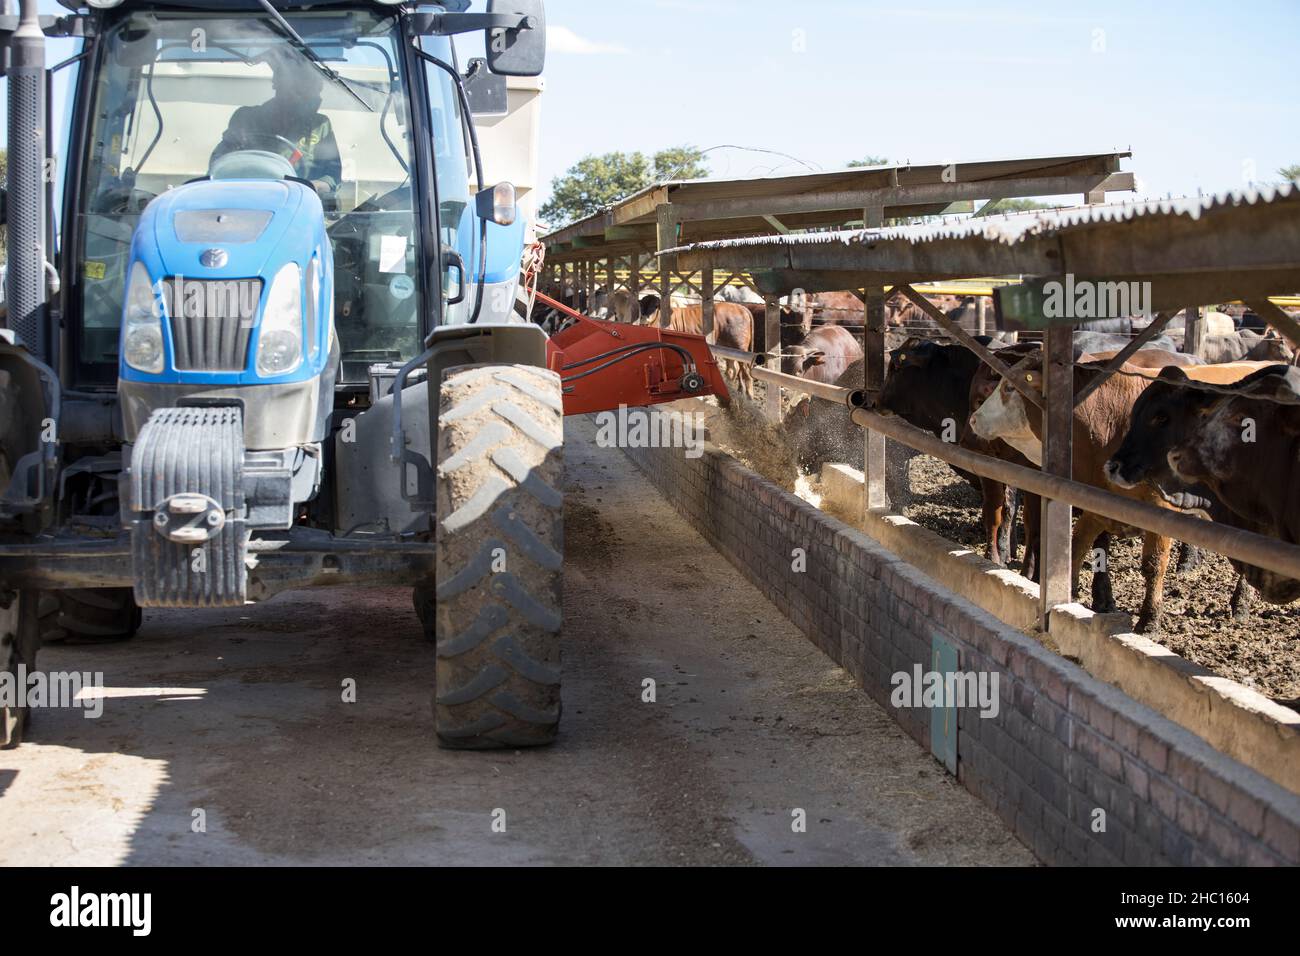 Feed truck delivering food to feeding cattle in a feedlot or feed yard Stock Photo